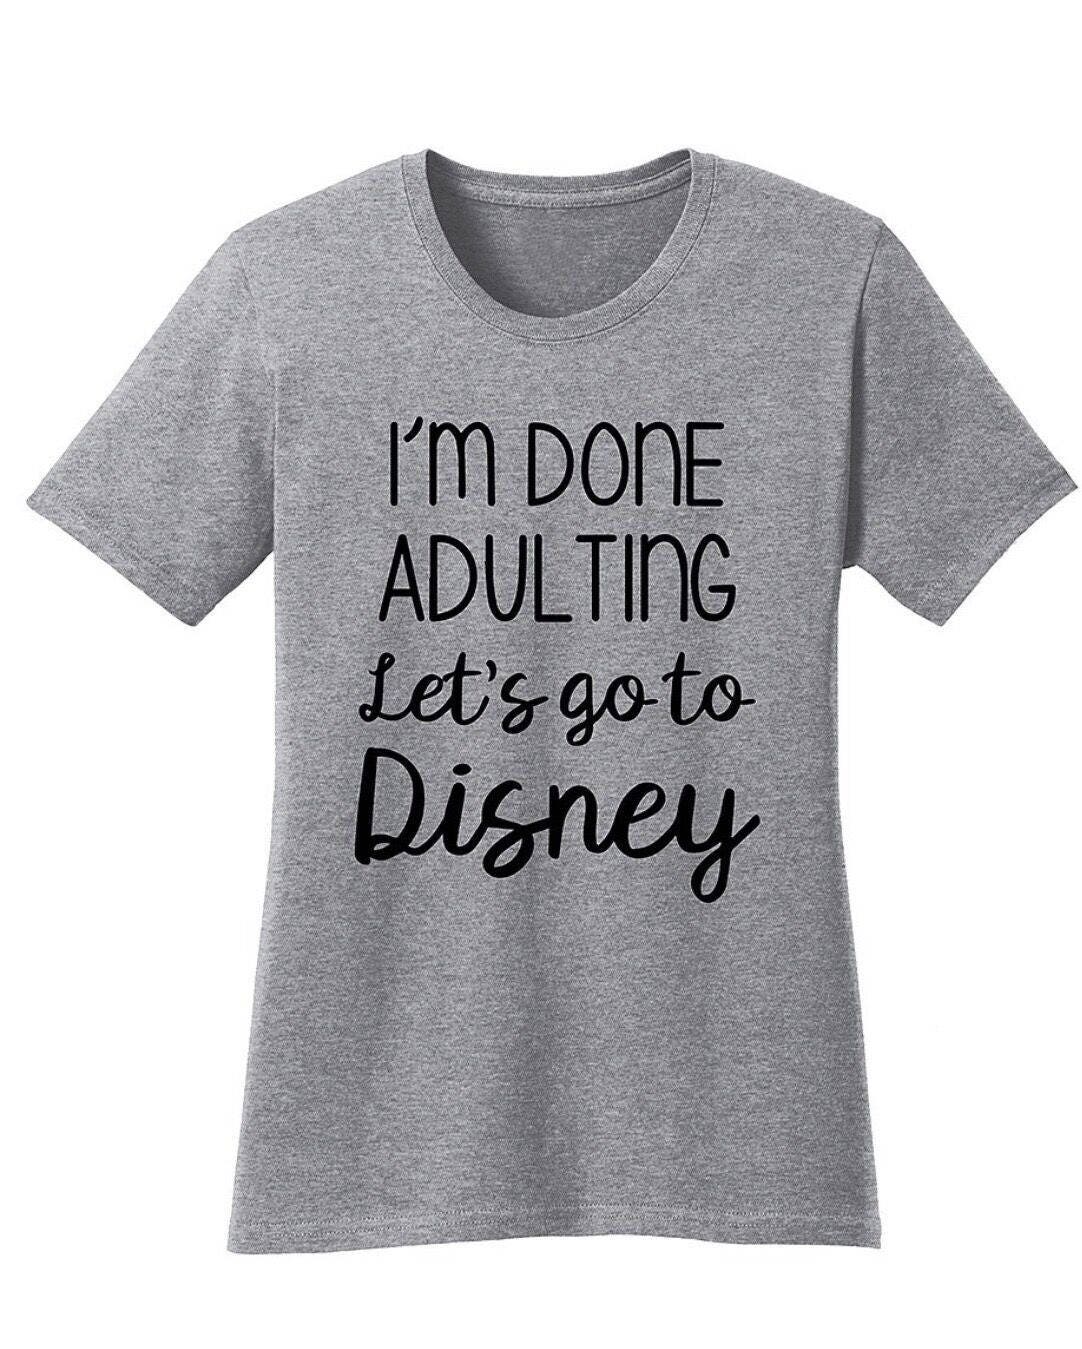 I'm done adulting Let's go to Disney t-shirt | Etsy